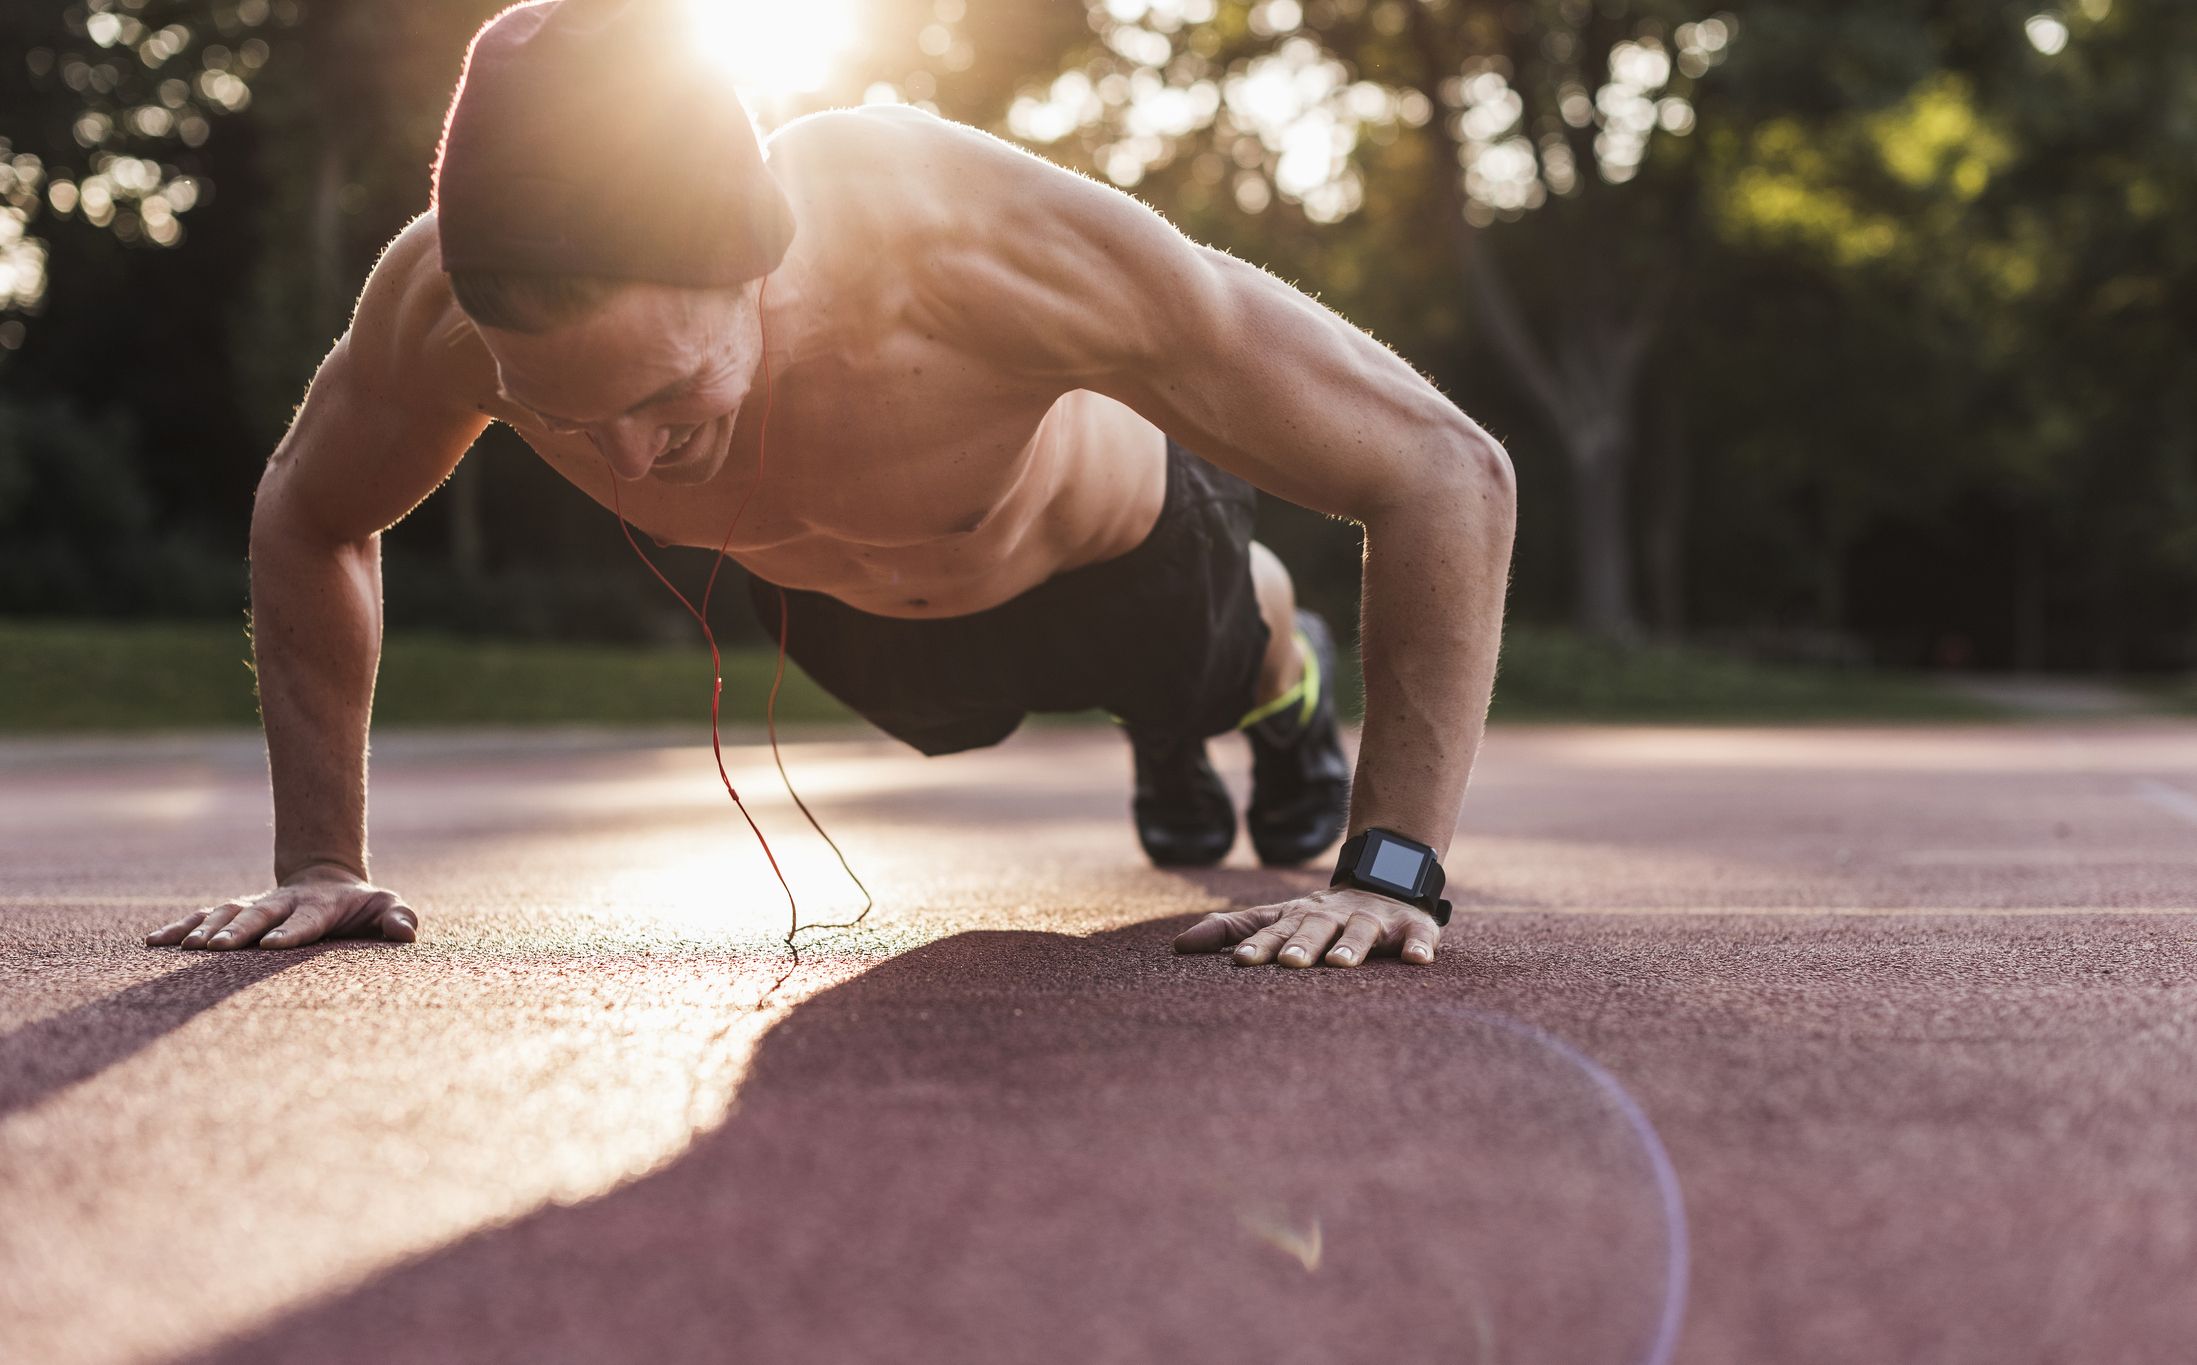 How Many Pushups You Can Do May Predict Heart Health